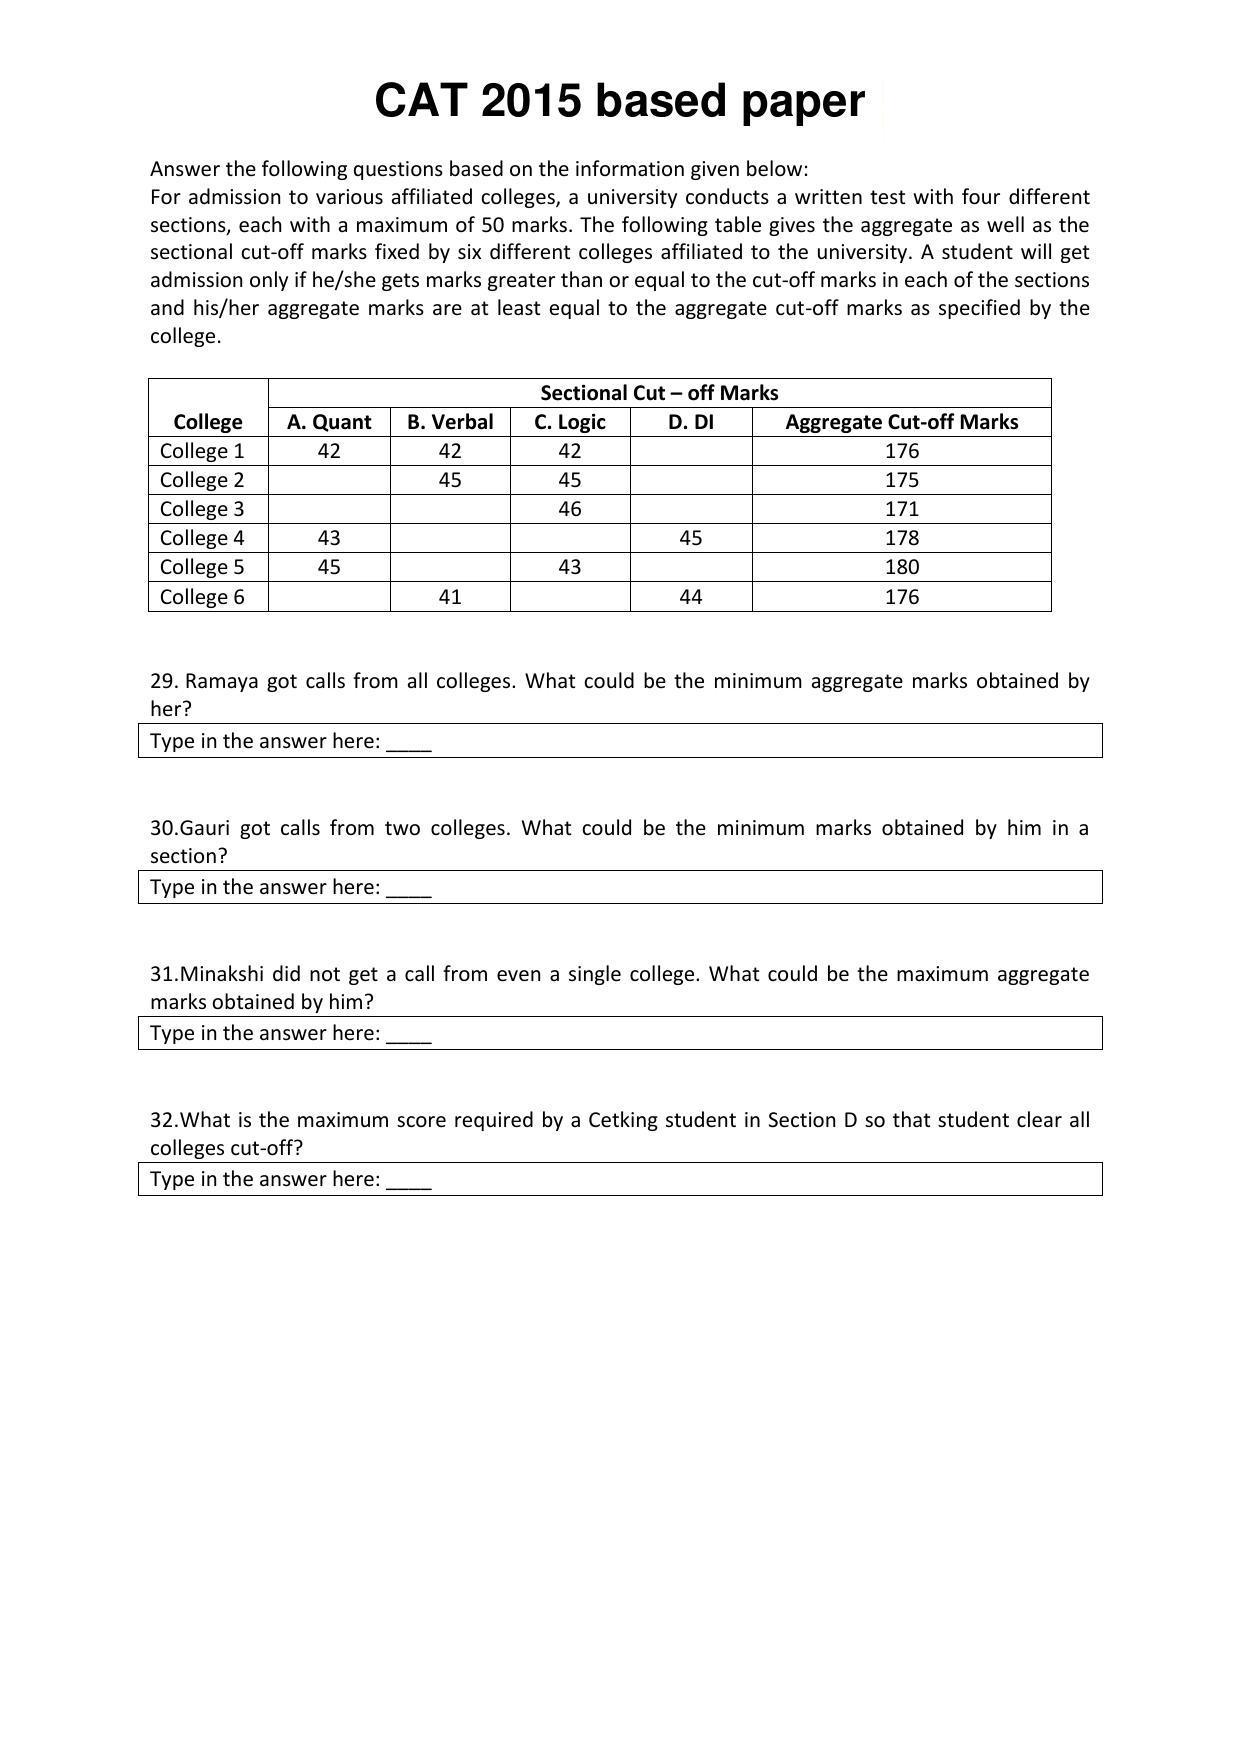 CAT 2015 CAT DILR Question Paper - Page 8